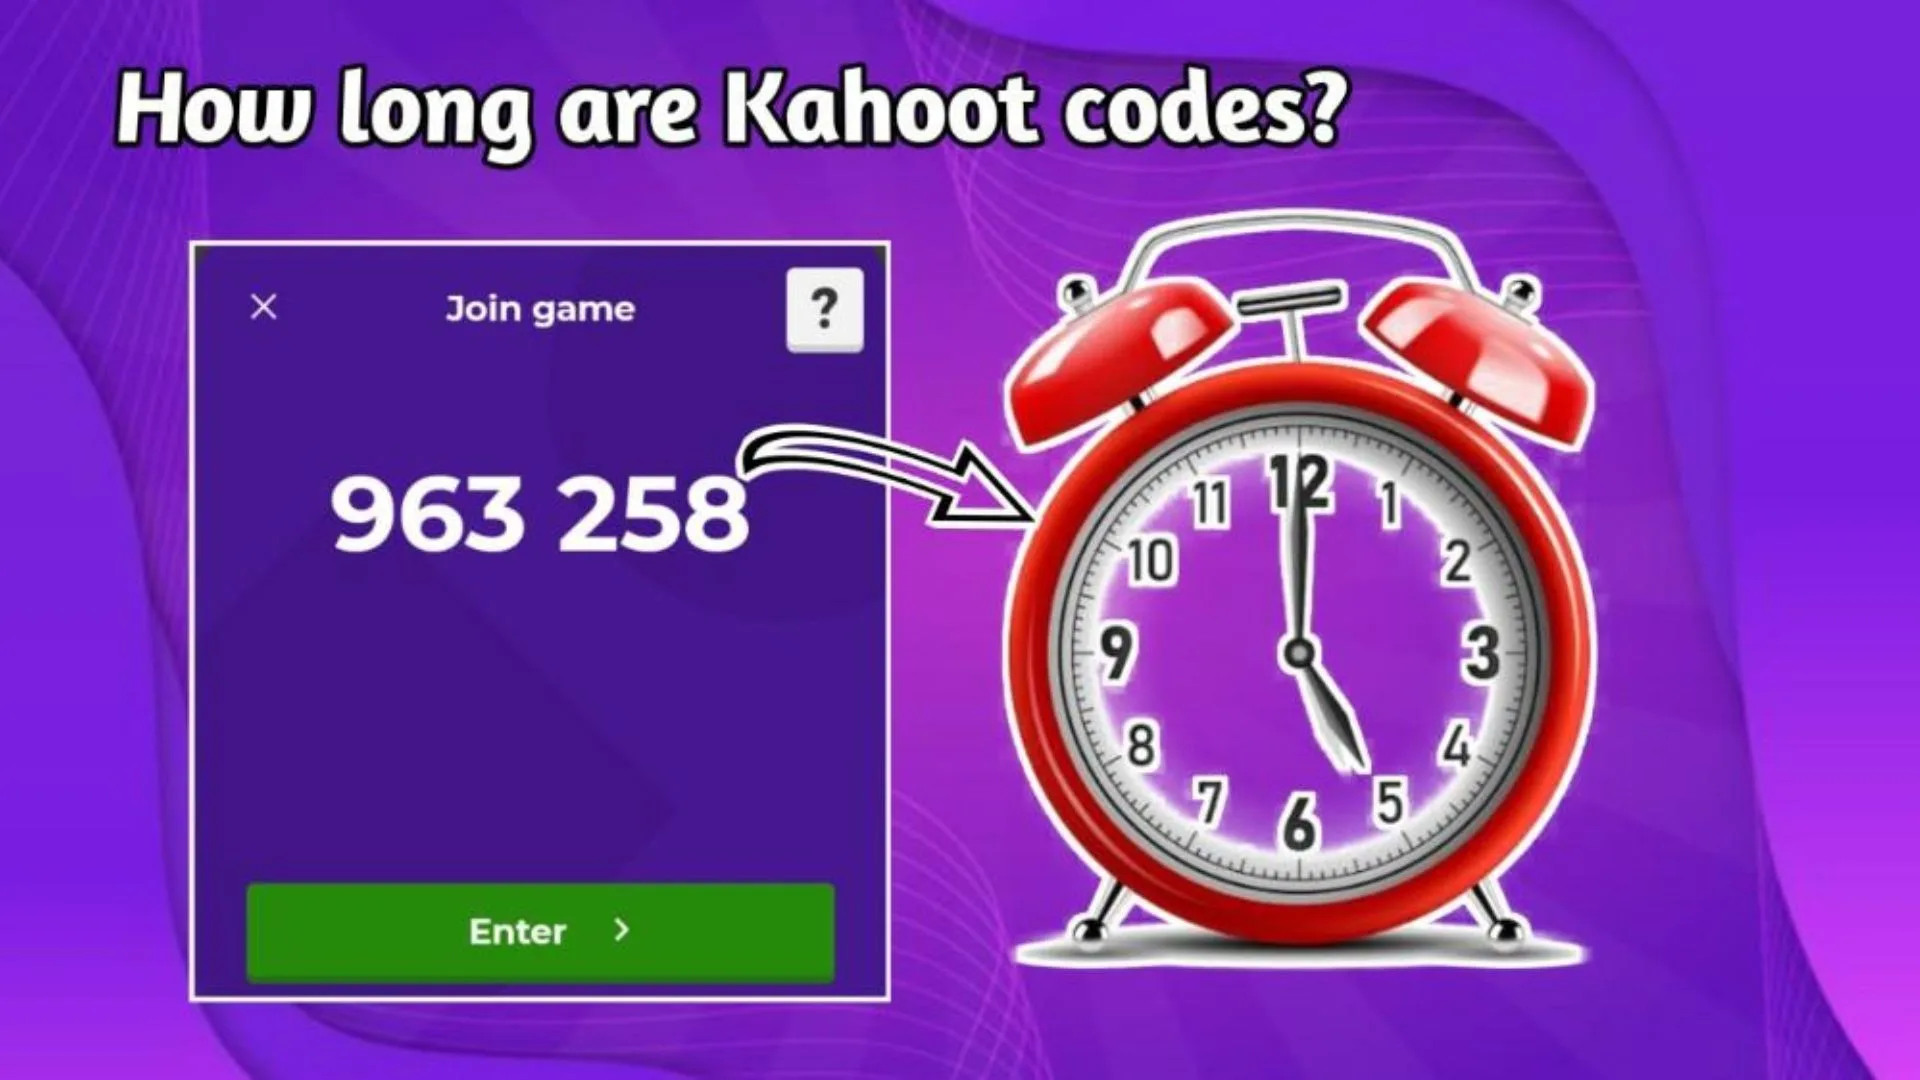 How long are kahoot codes